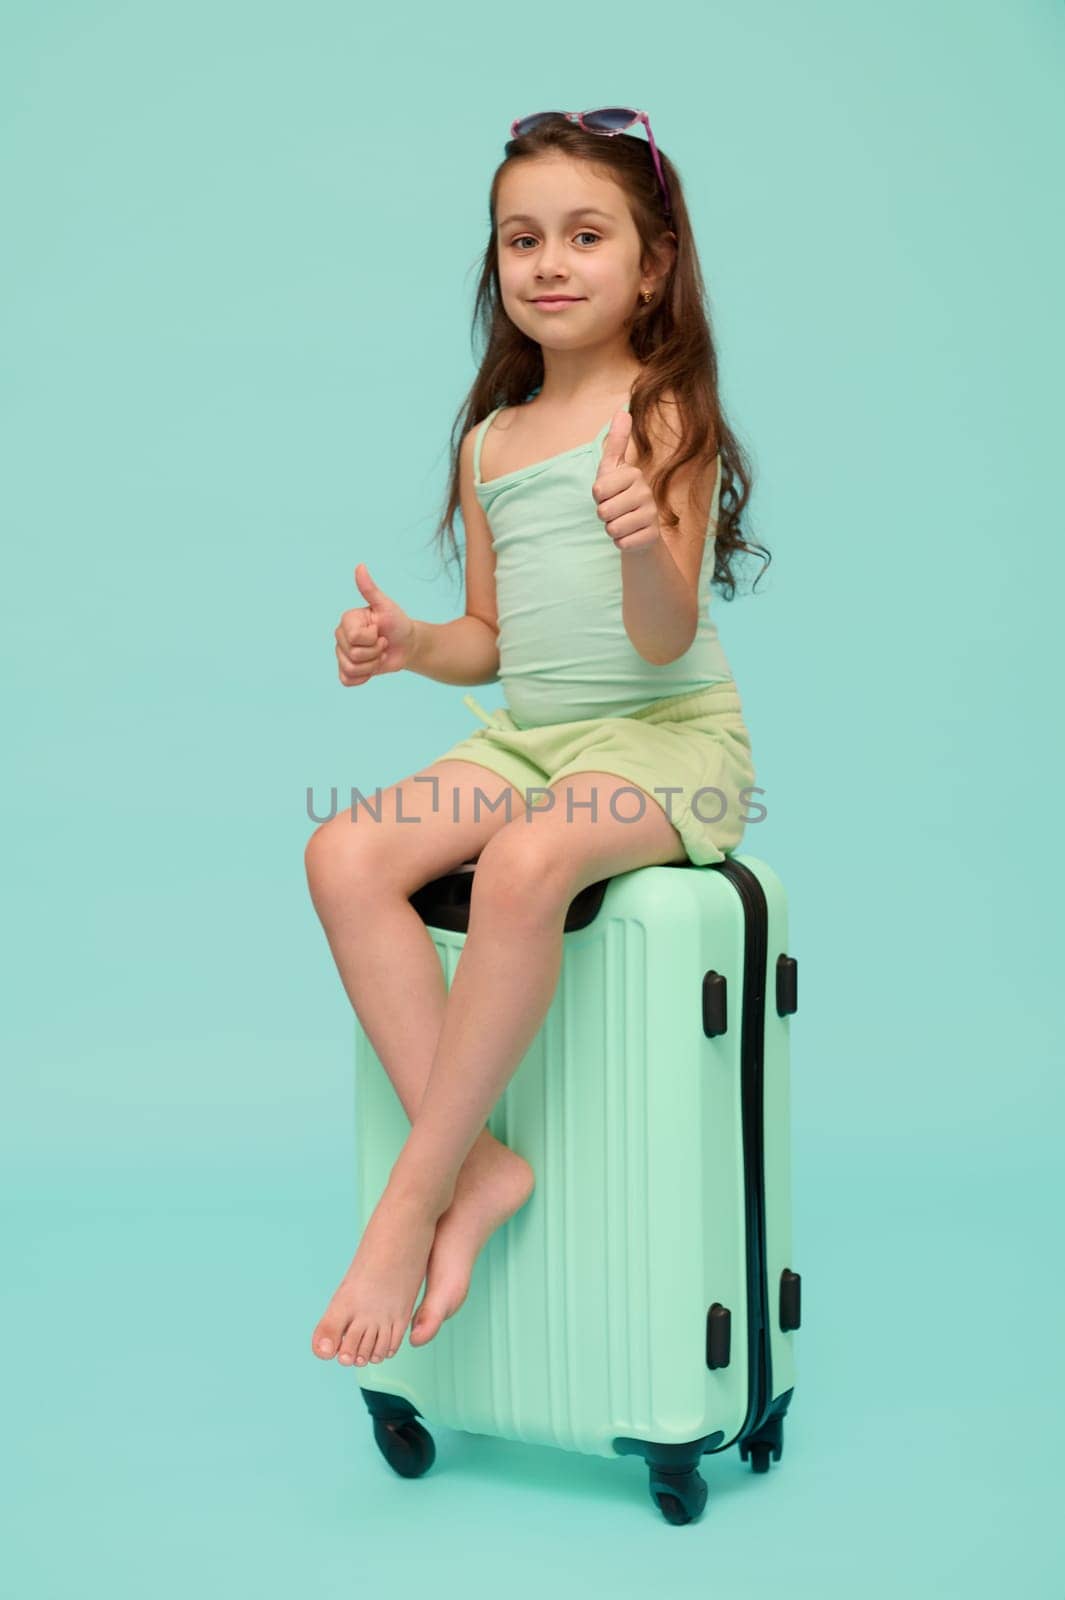 Authentic traveler girl, going for summer holidays, thumbs up, smiles at camera, sitting on suitcase of turquoise color by artgf